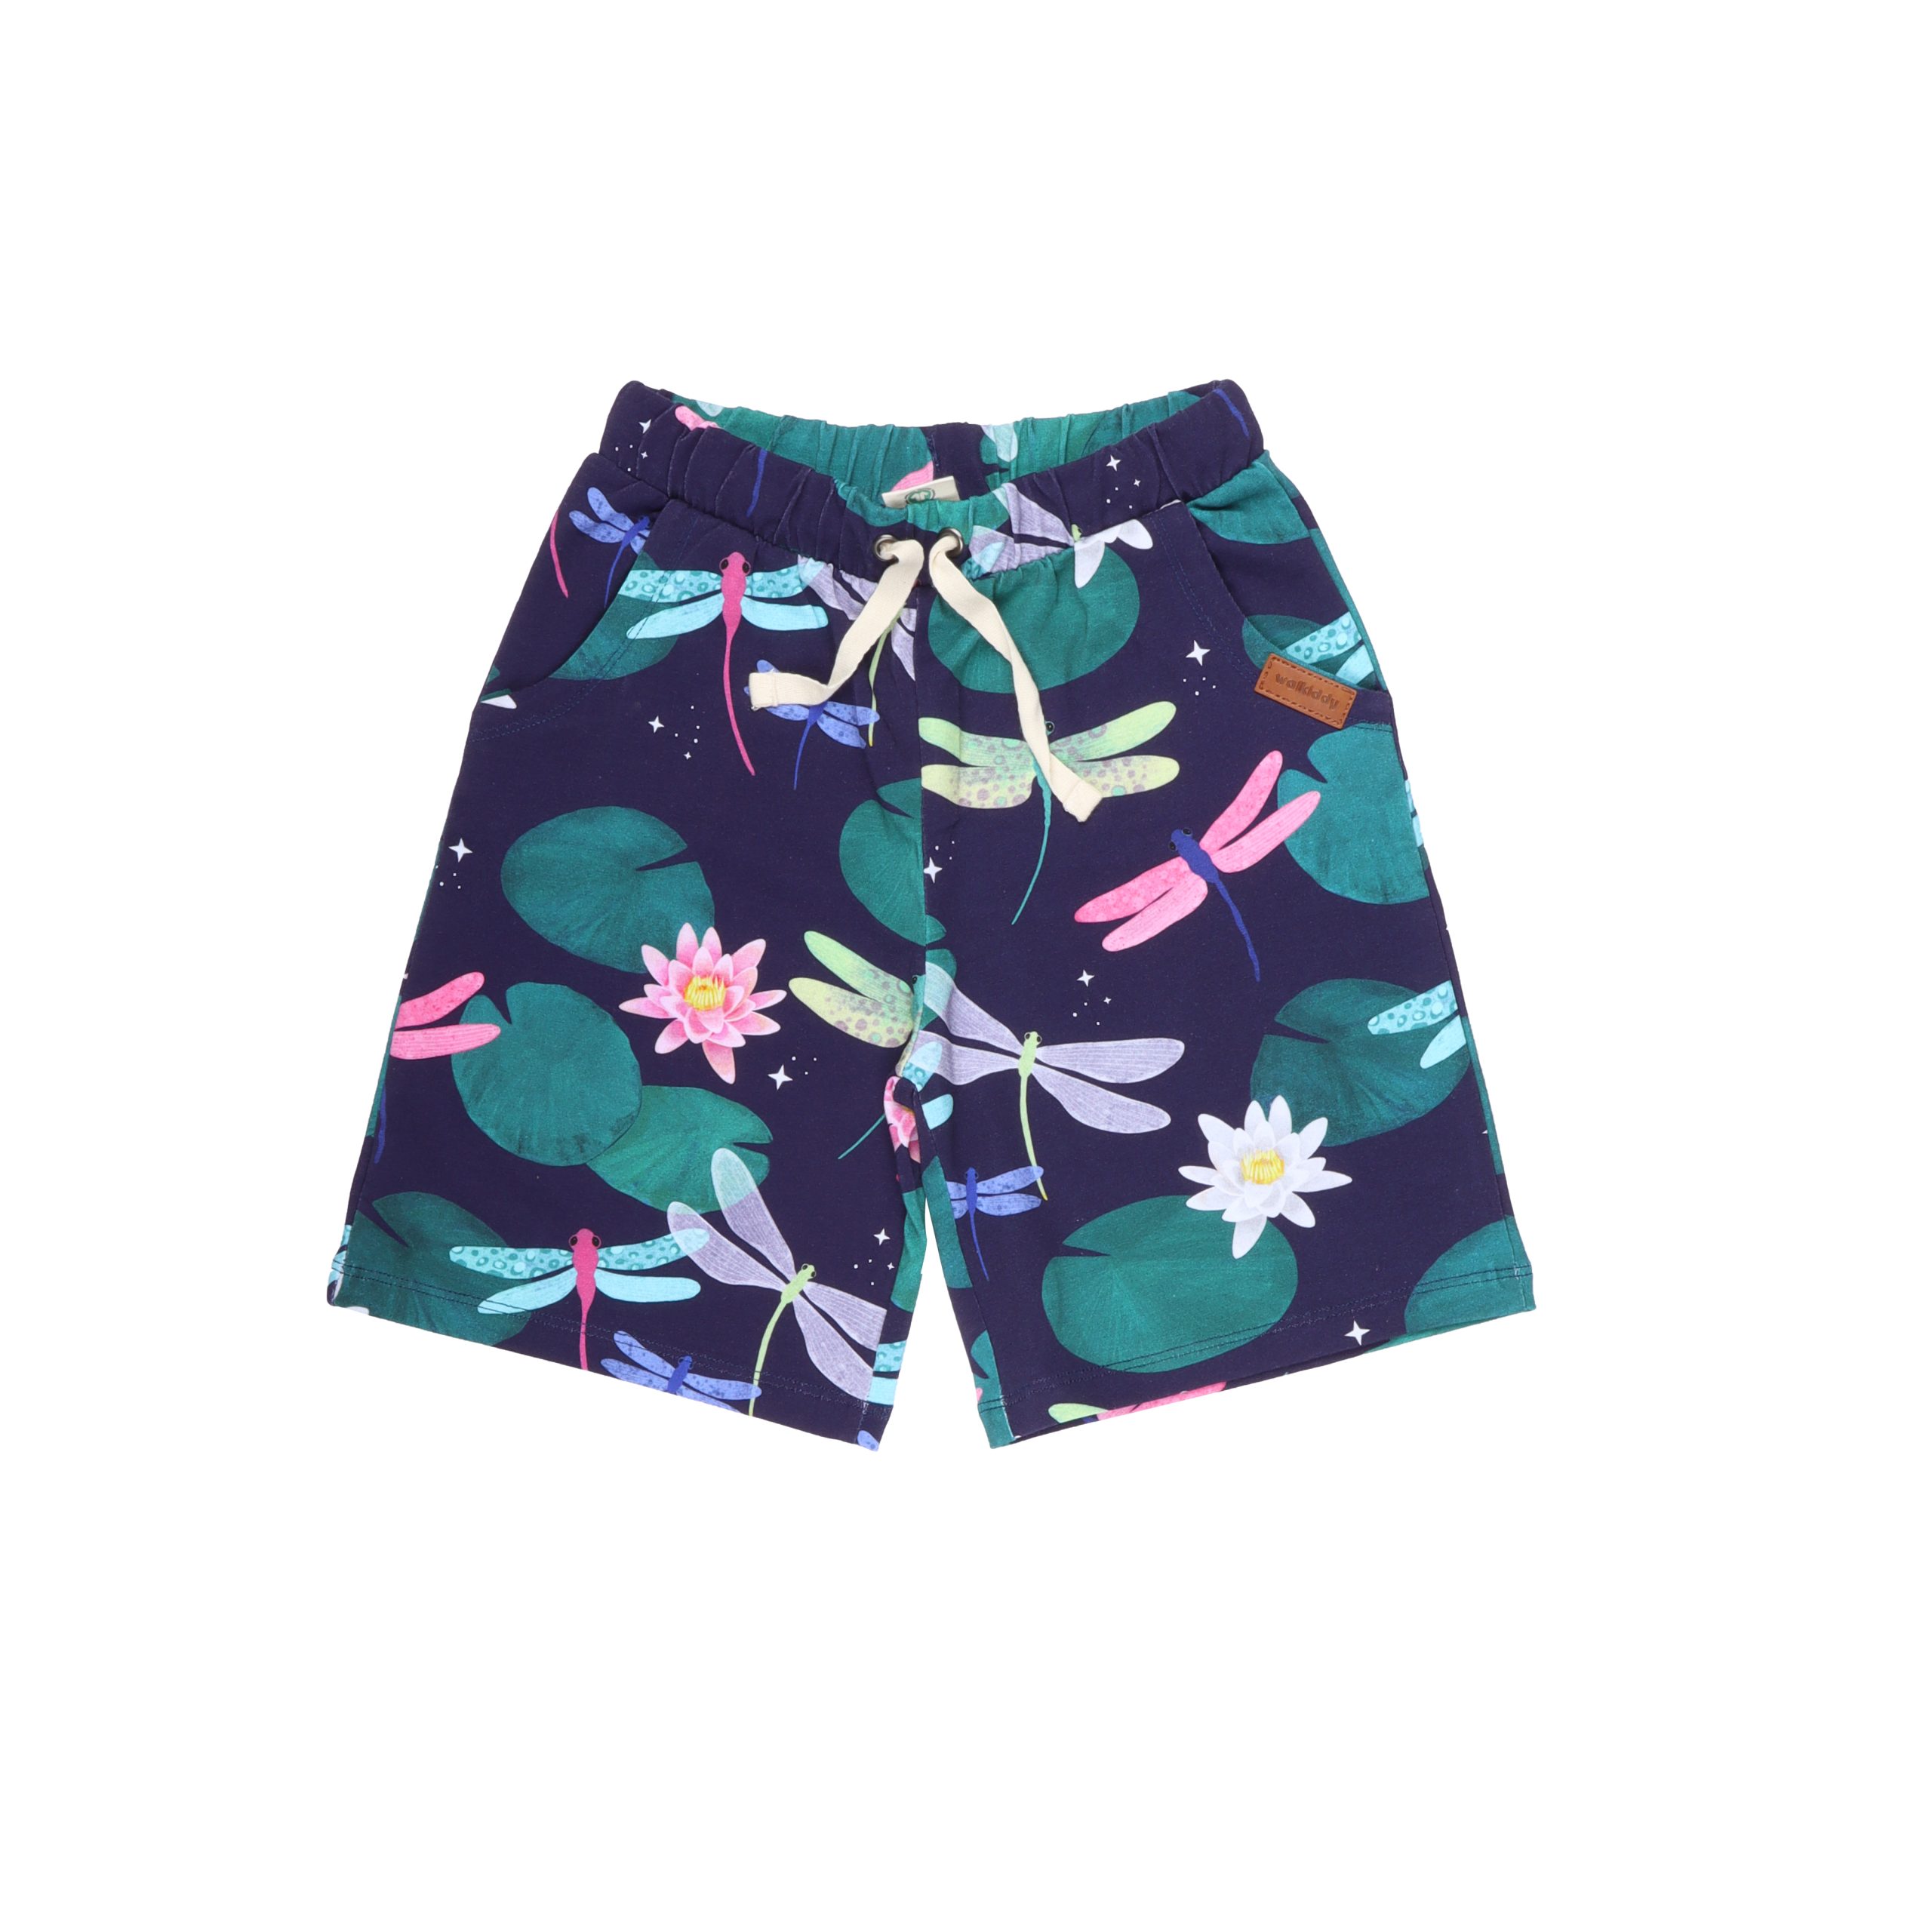 Walkiddy Colourful Dragonflies Shorts (Size 116 only) – Gwisk Lowen